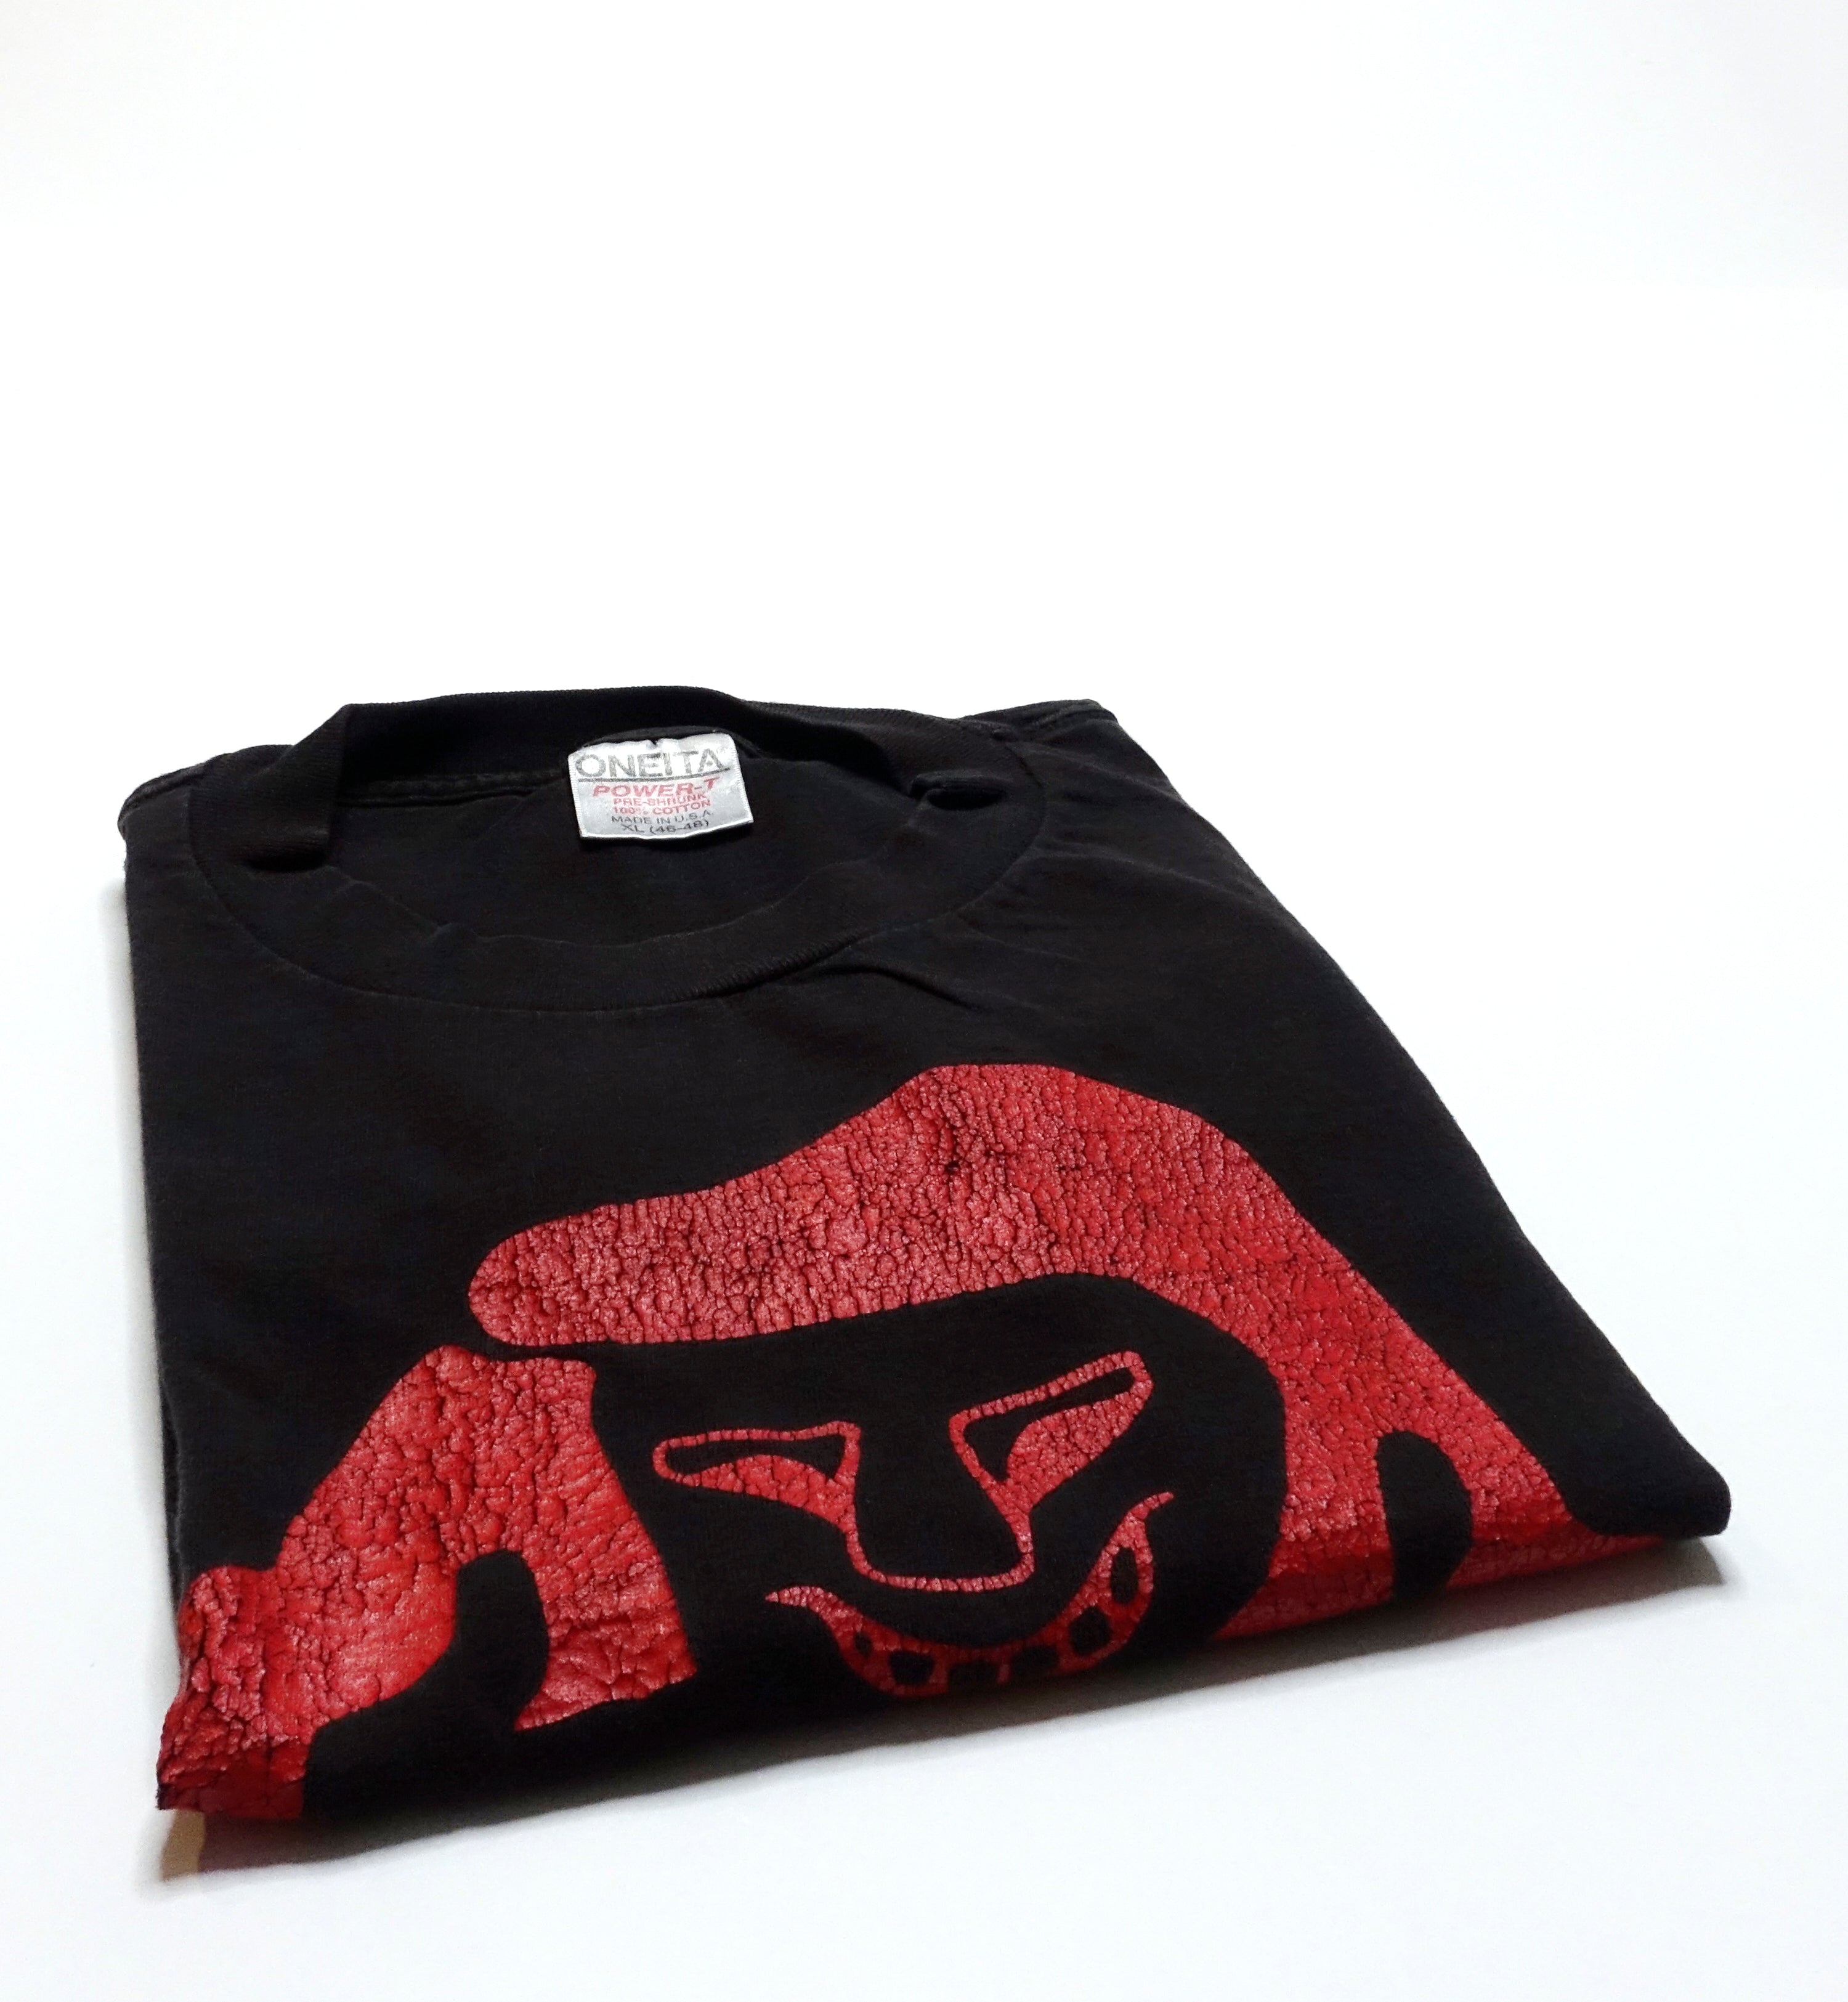 Stereolab – Cliff 90's Tour Shirt Size XL (Black/Red)